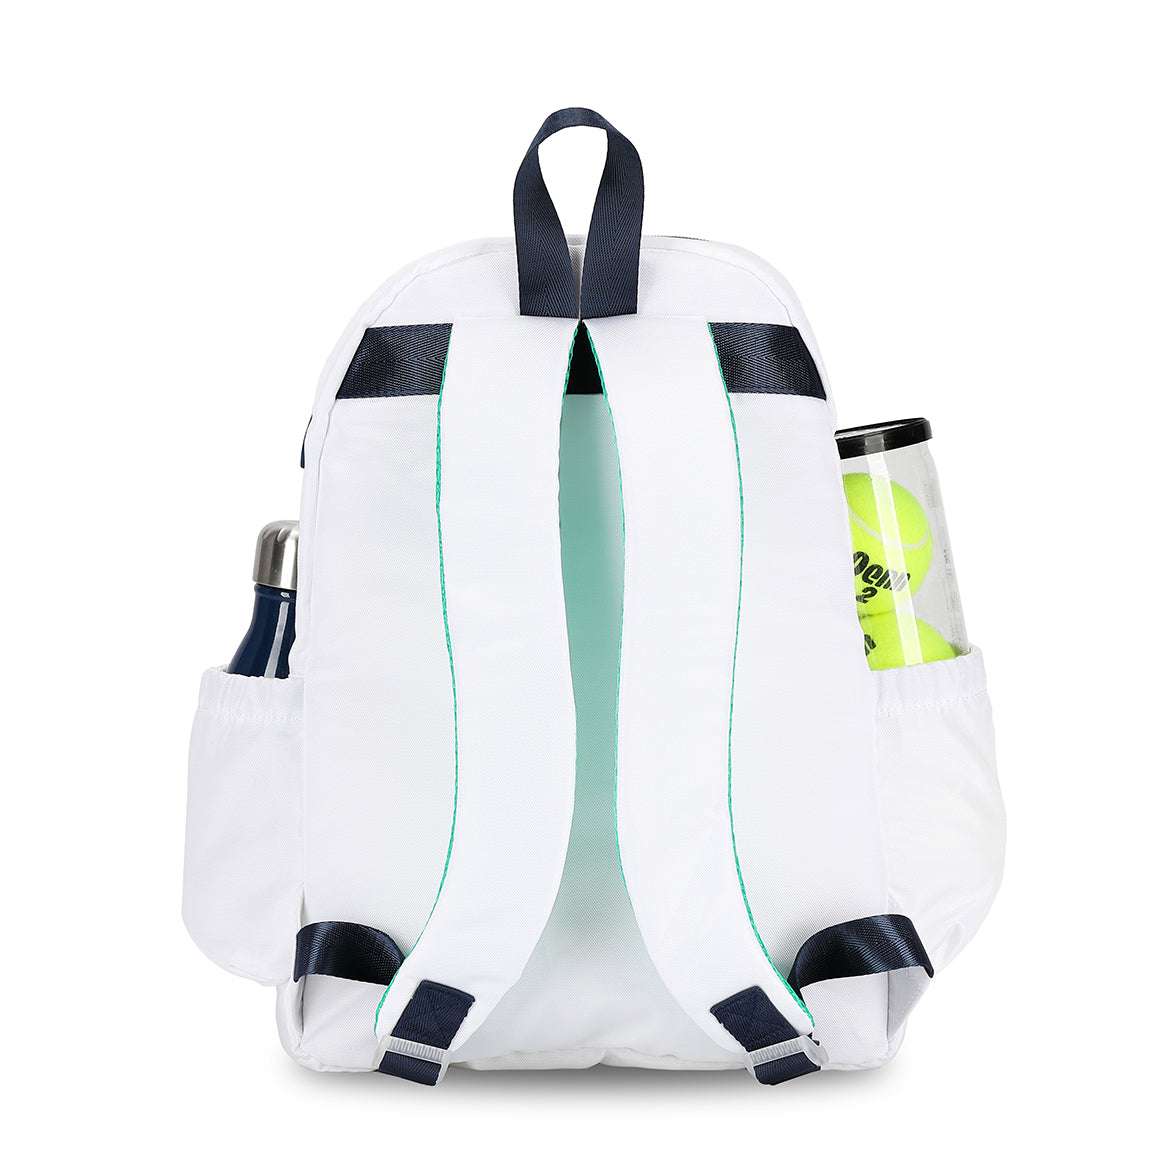 Back view of white kids tennis backpack with navy trim.